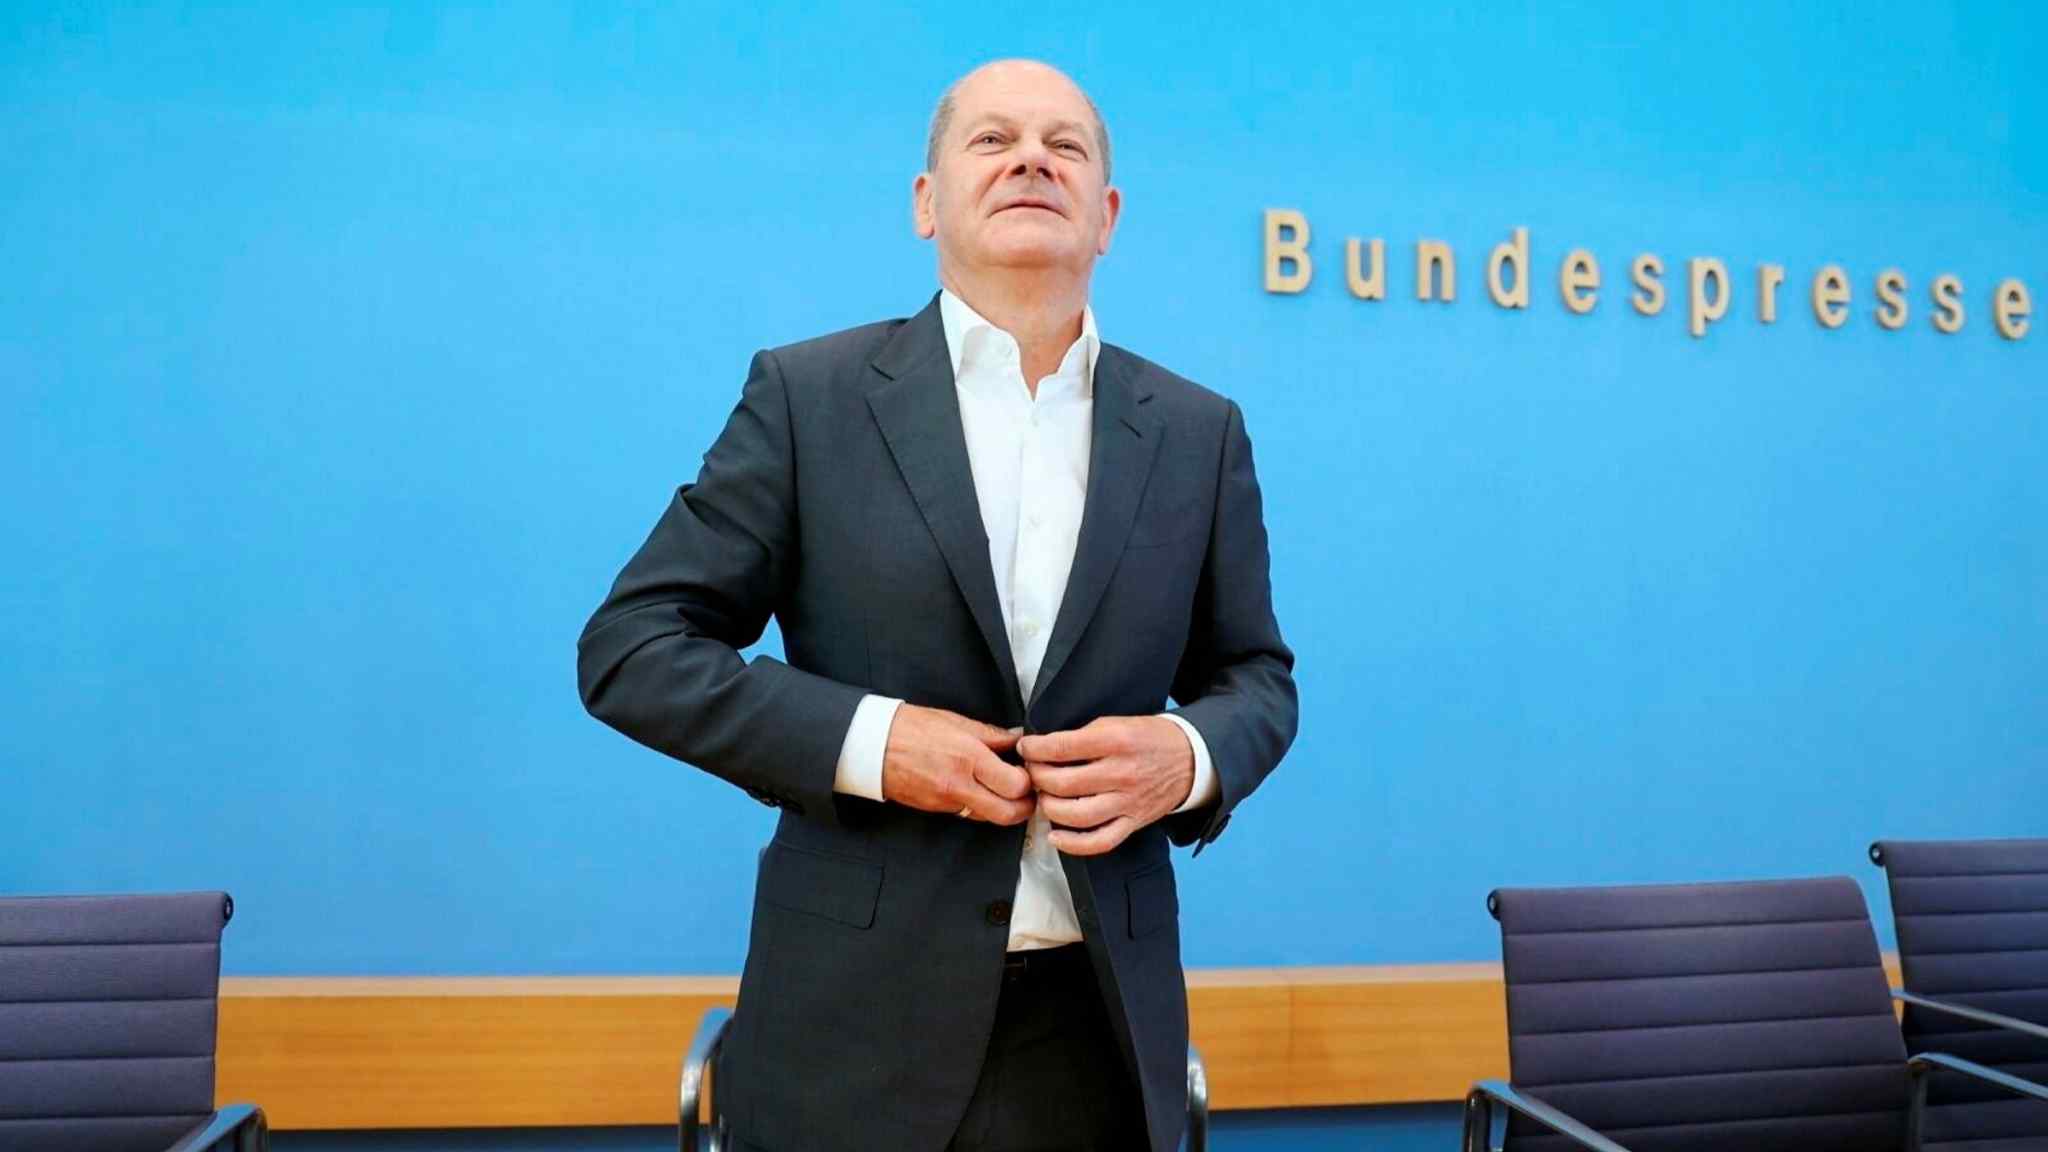 Olaf Scholz backs proposal for new European gas pipeline 